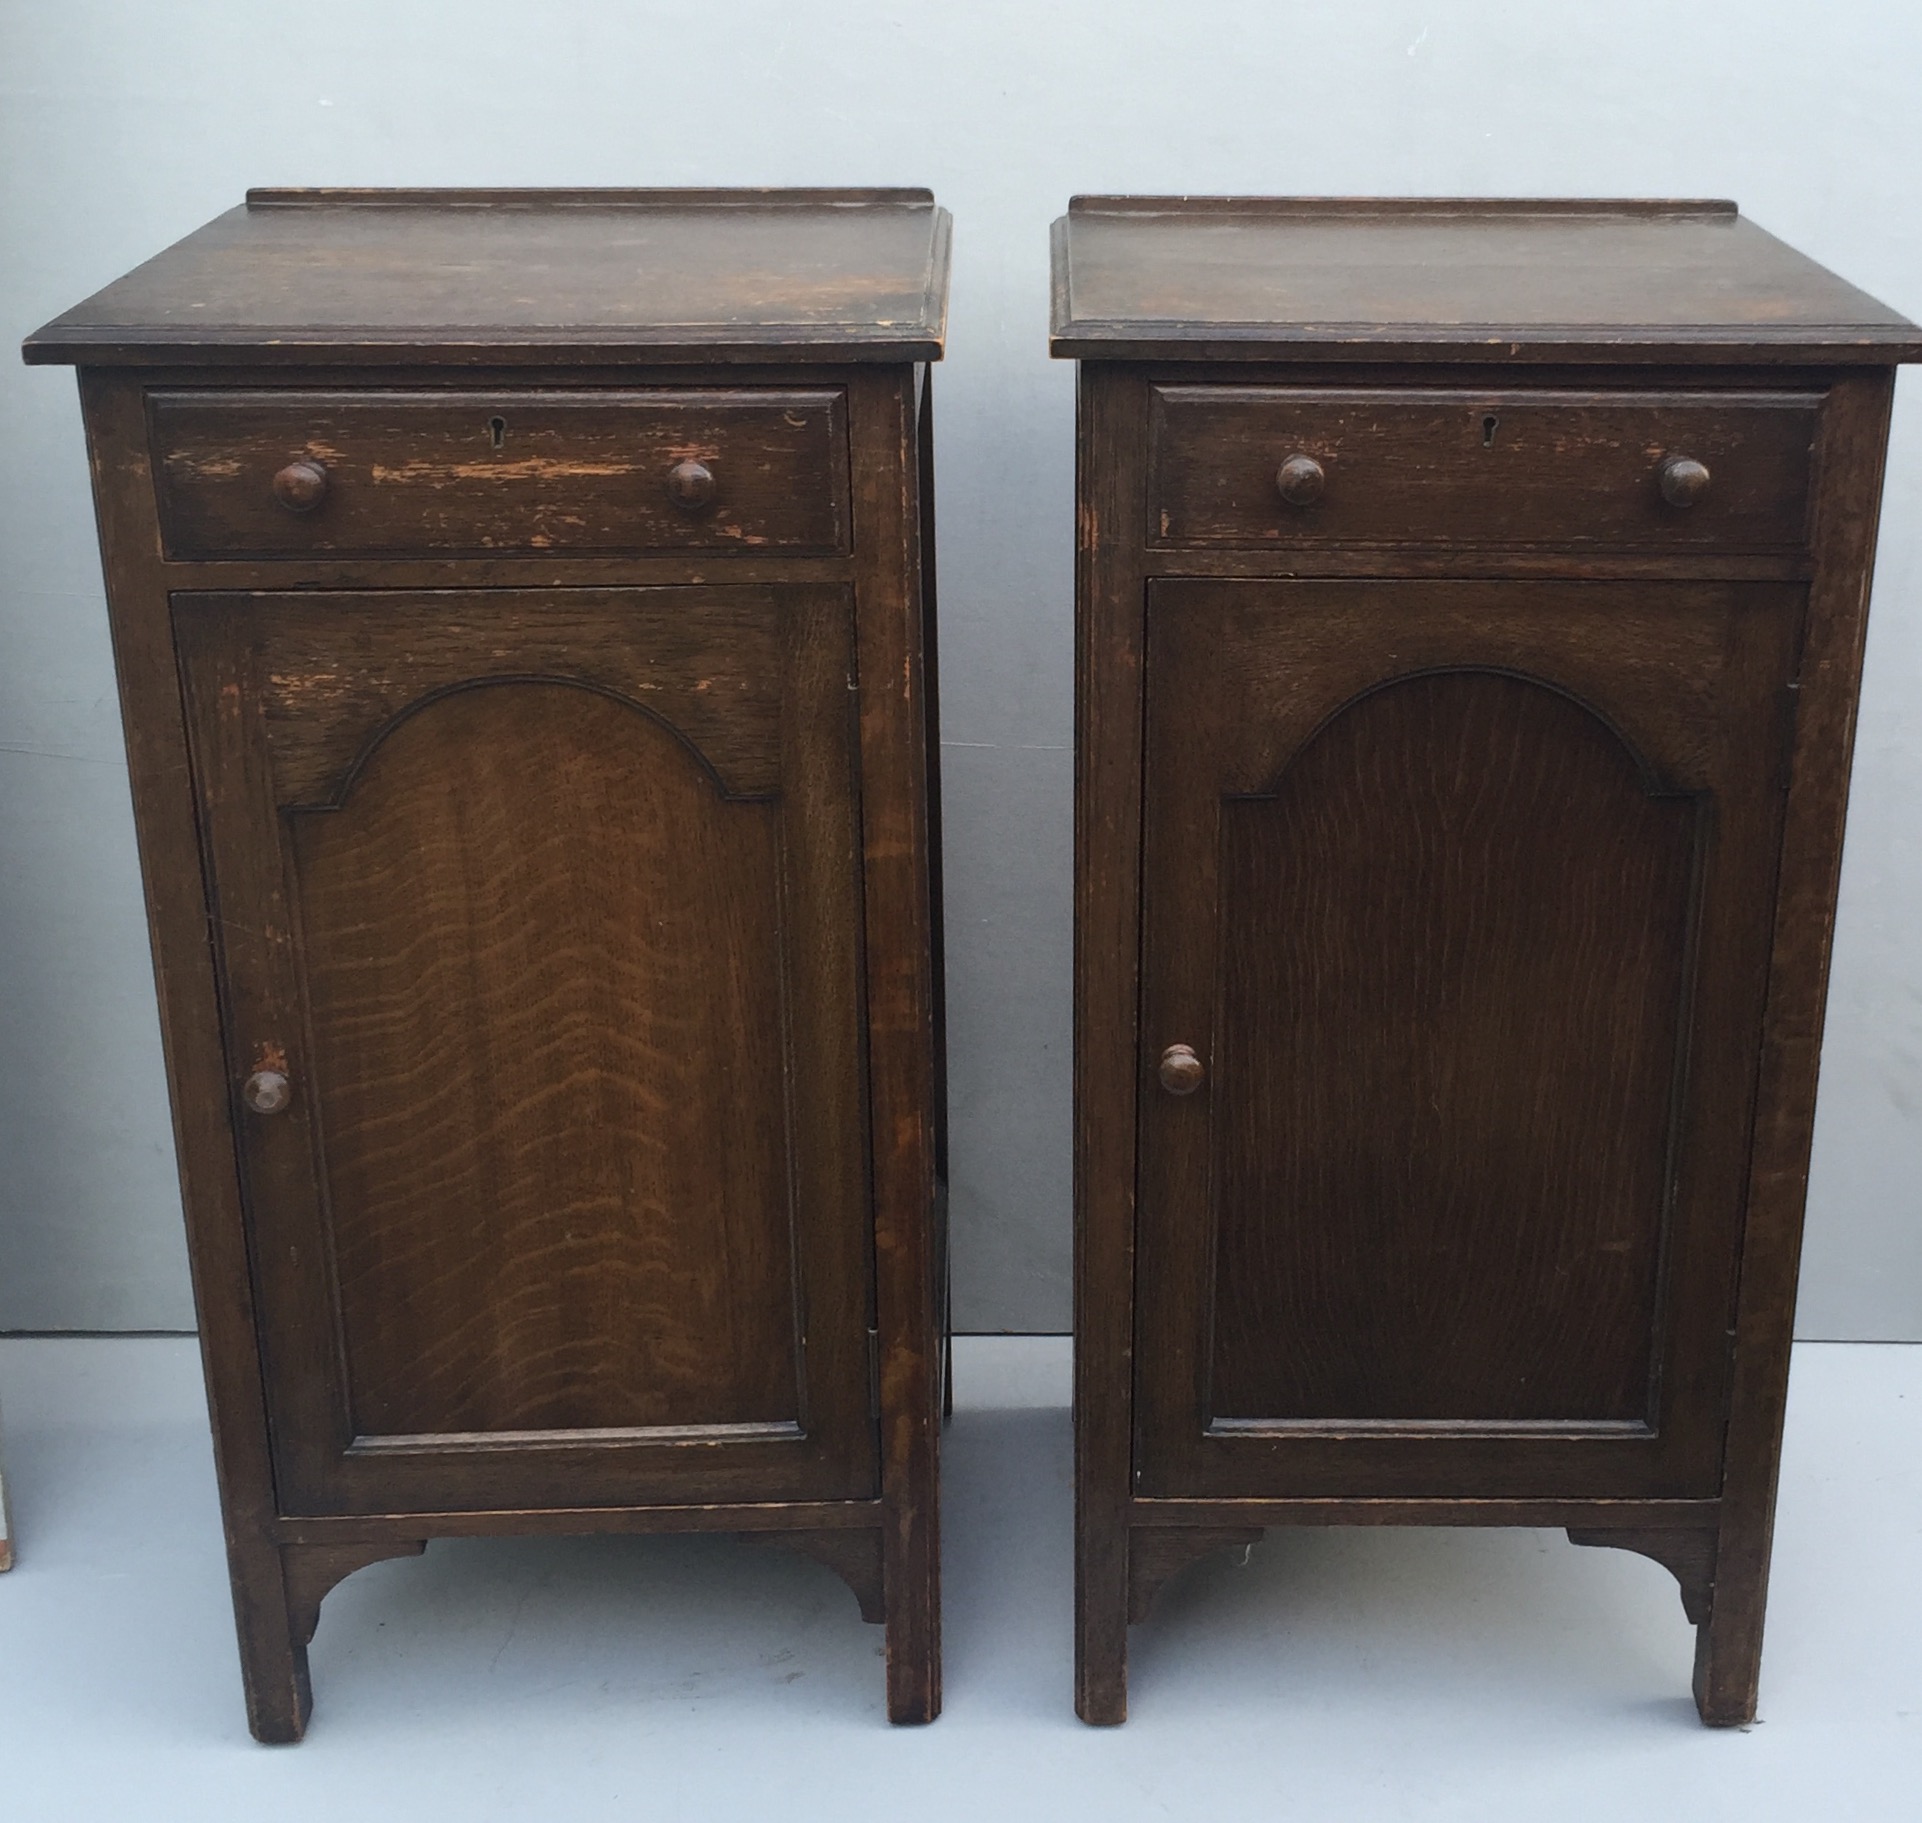 TWO EARLY 20TH CENTURY OAK BEDSIDE CABINETS With single drawers above arched panelled doors.